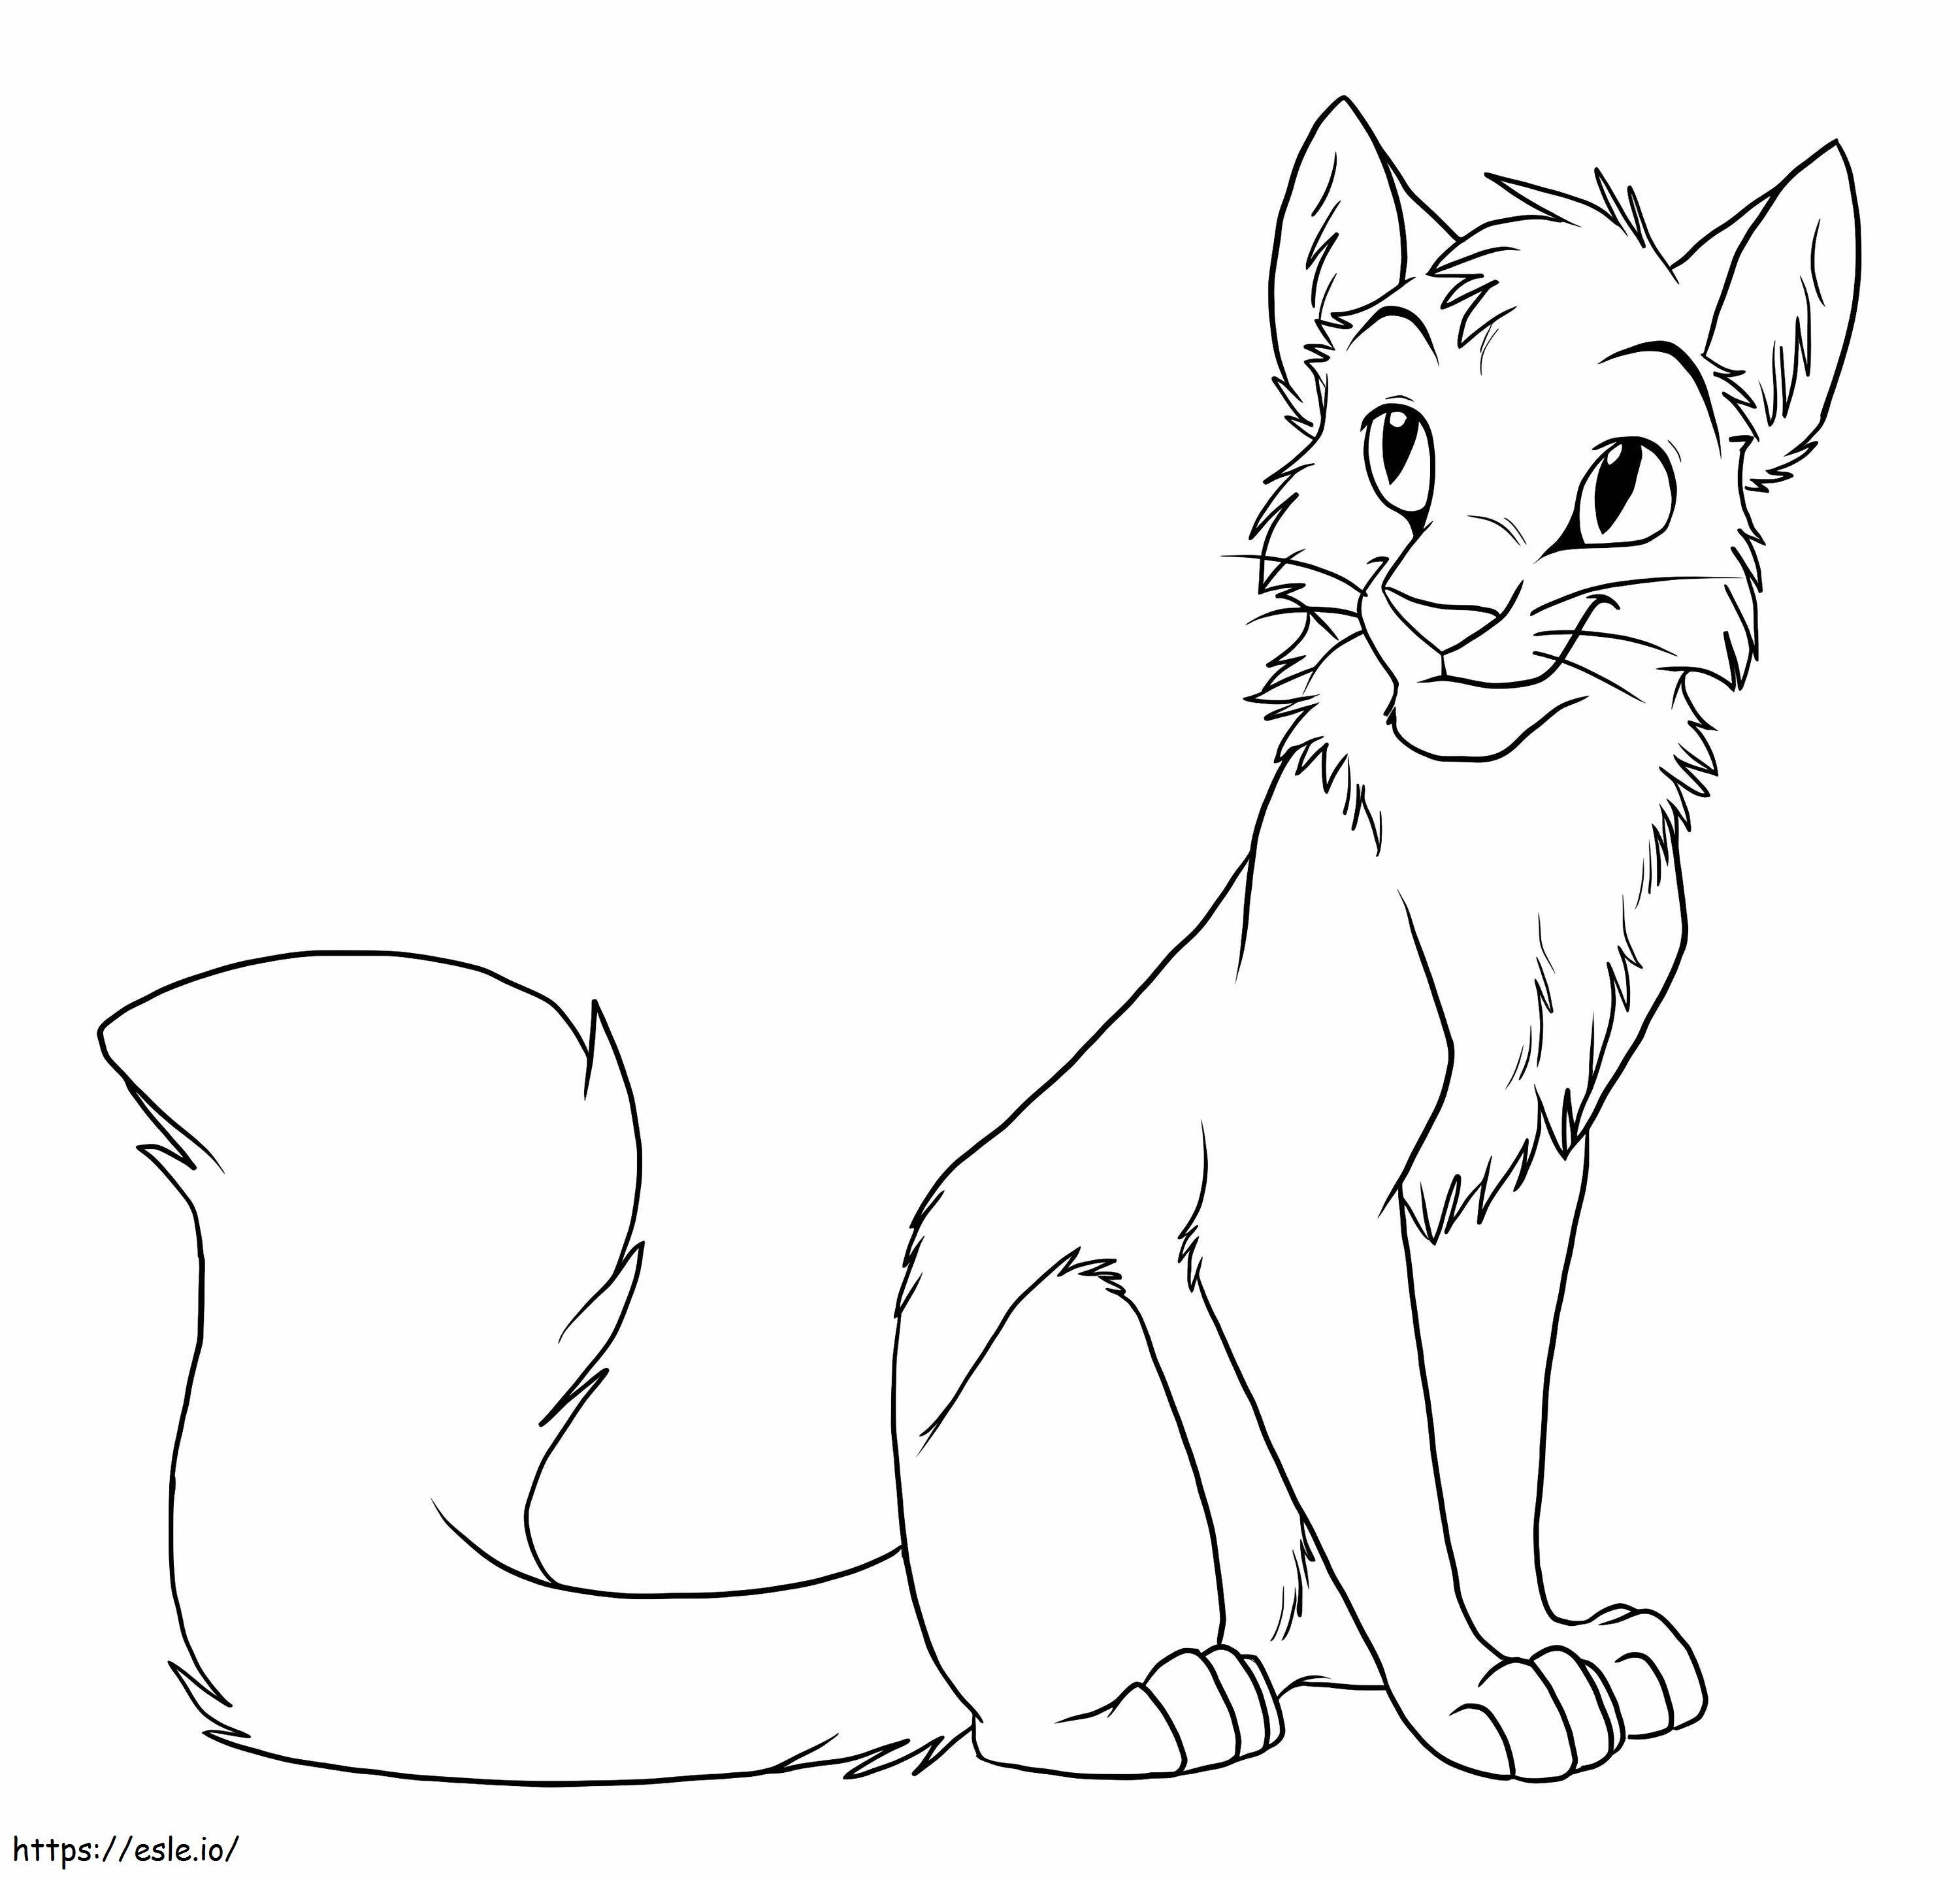 Sitting Warrior Cats coloring page